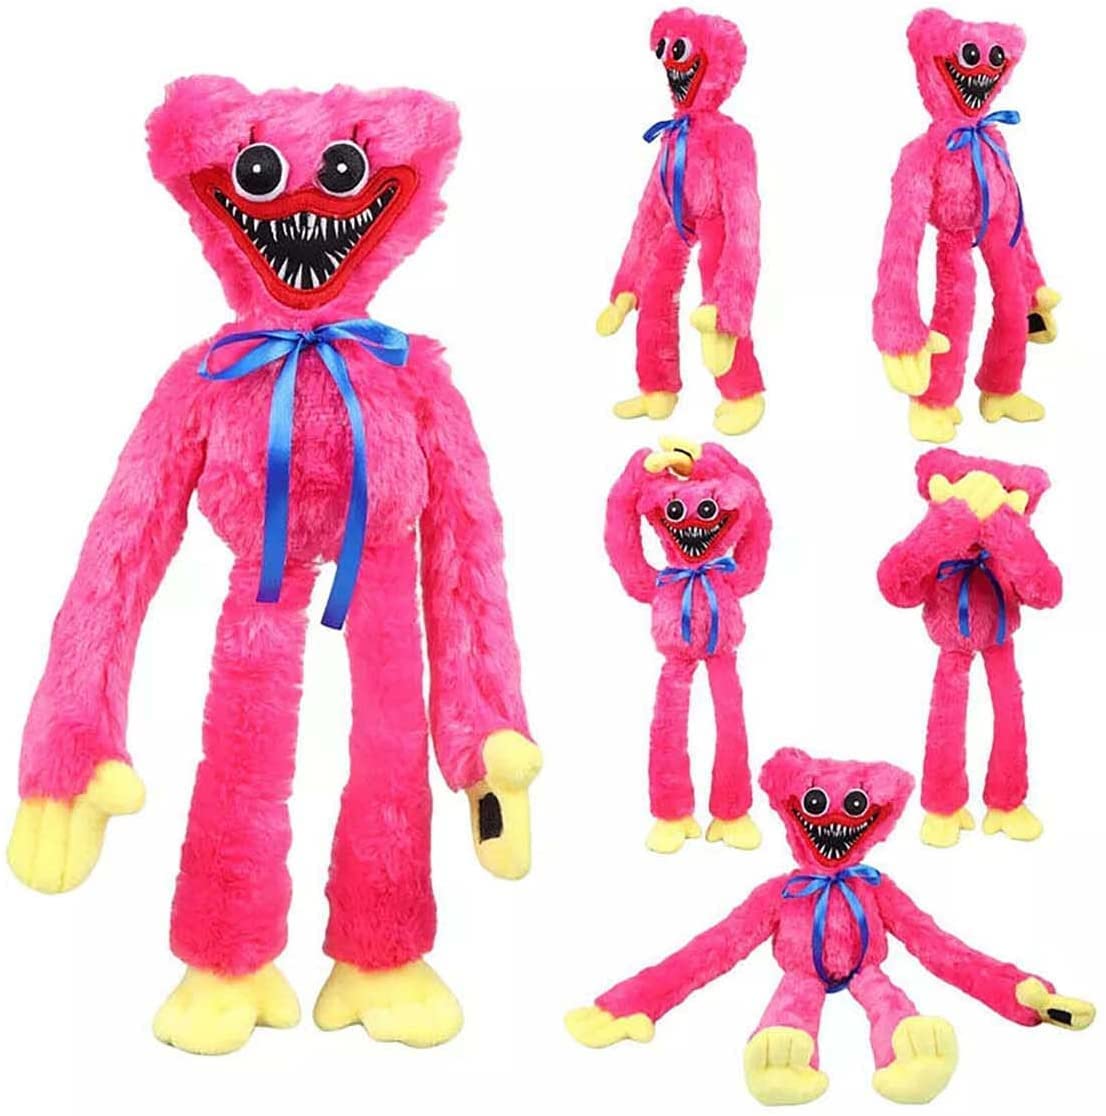 Poppy Playtime Huggy wuggies Plush Toy, Blue/Pink Scary and Funny Plush  Doll, Realistic Blue Sausage Monster, Horror Christmas Stuffed Doll Gifts  for Game Fans and Kids Birthday  in | Lazada PH